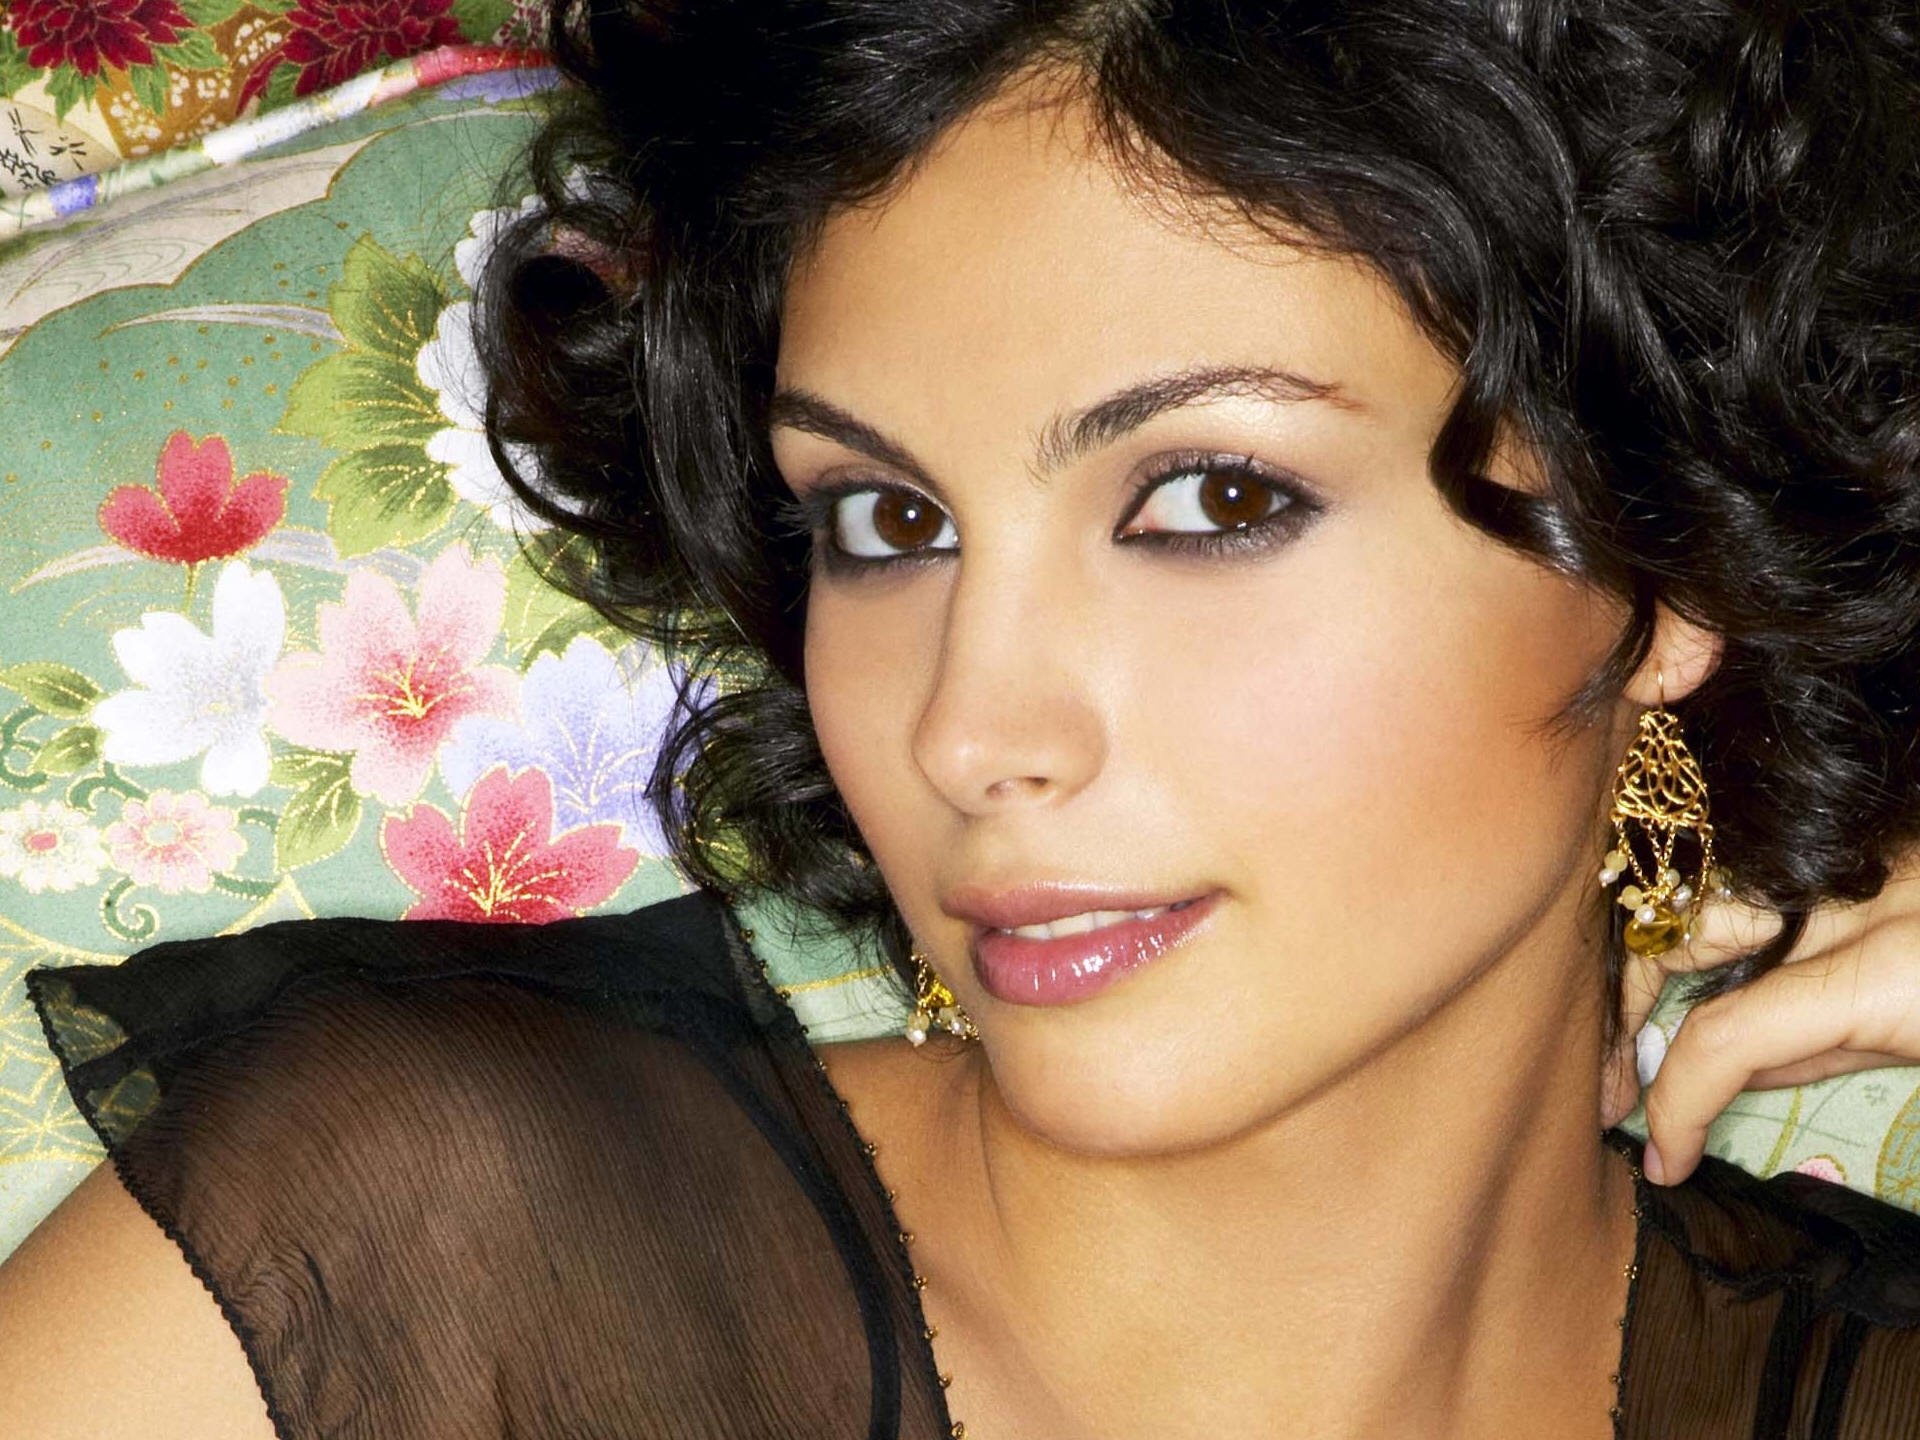 30 HD wallpapers, Morena Baccarin, Celebrity backgrounds, Beautiful actress, 1920x1440 HD Desktop